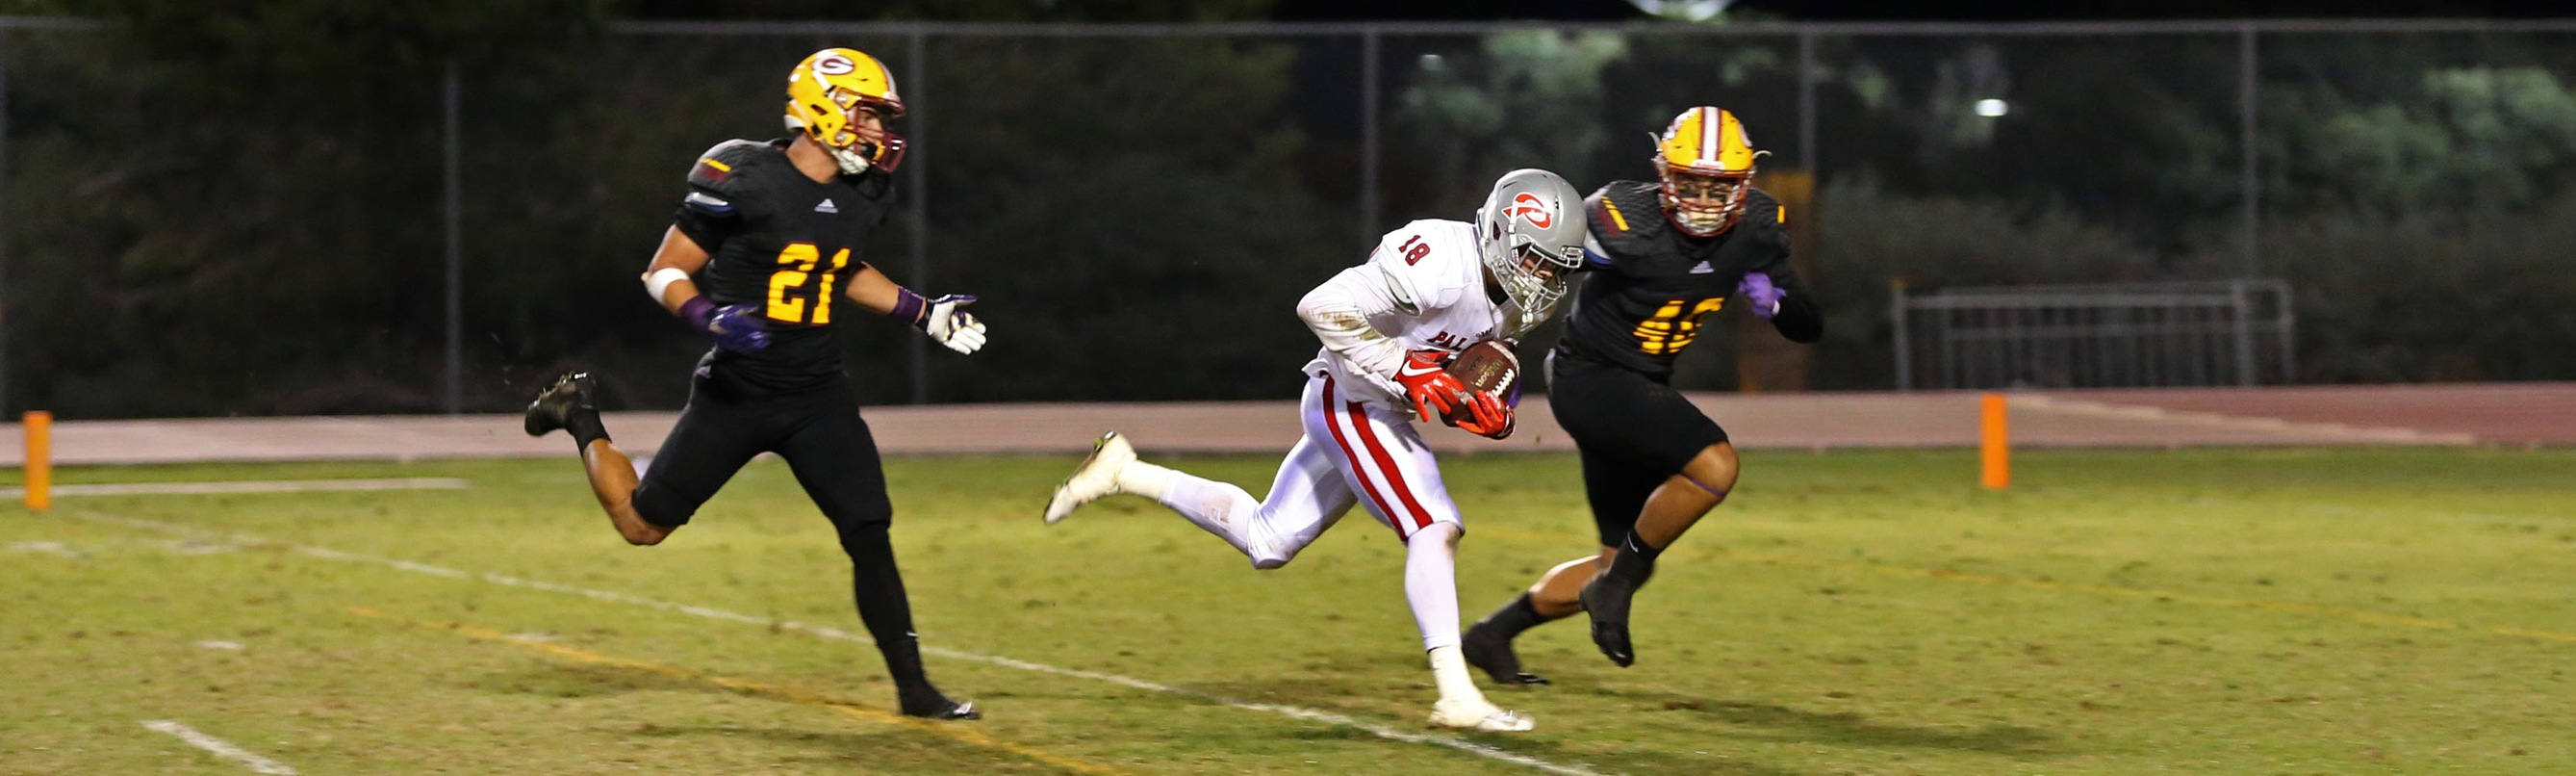 Chris Grimes races between two Saddleback defenders for a receiving TD. -- Photo by Hugh Cox